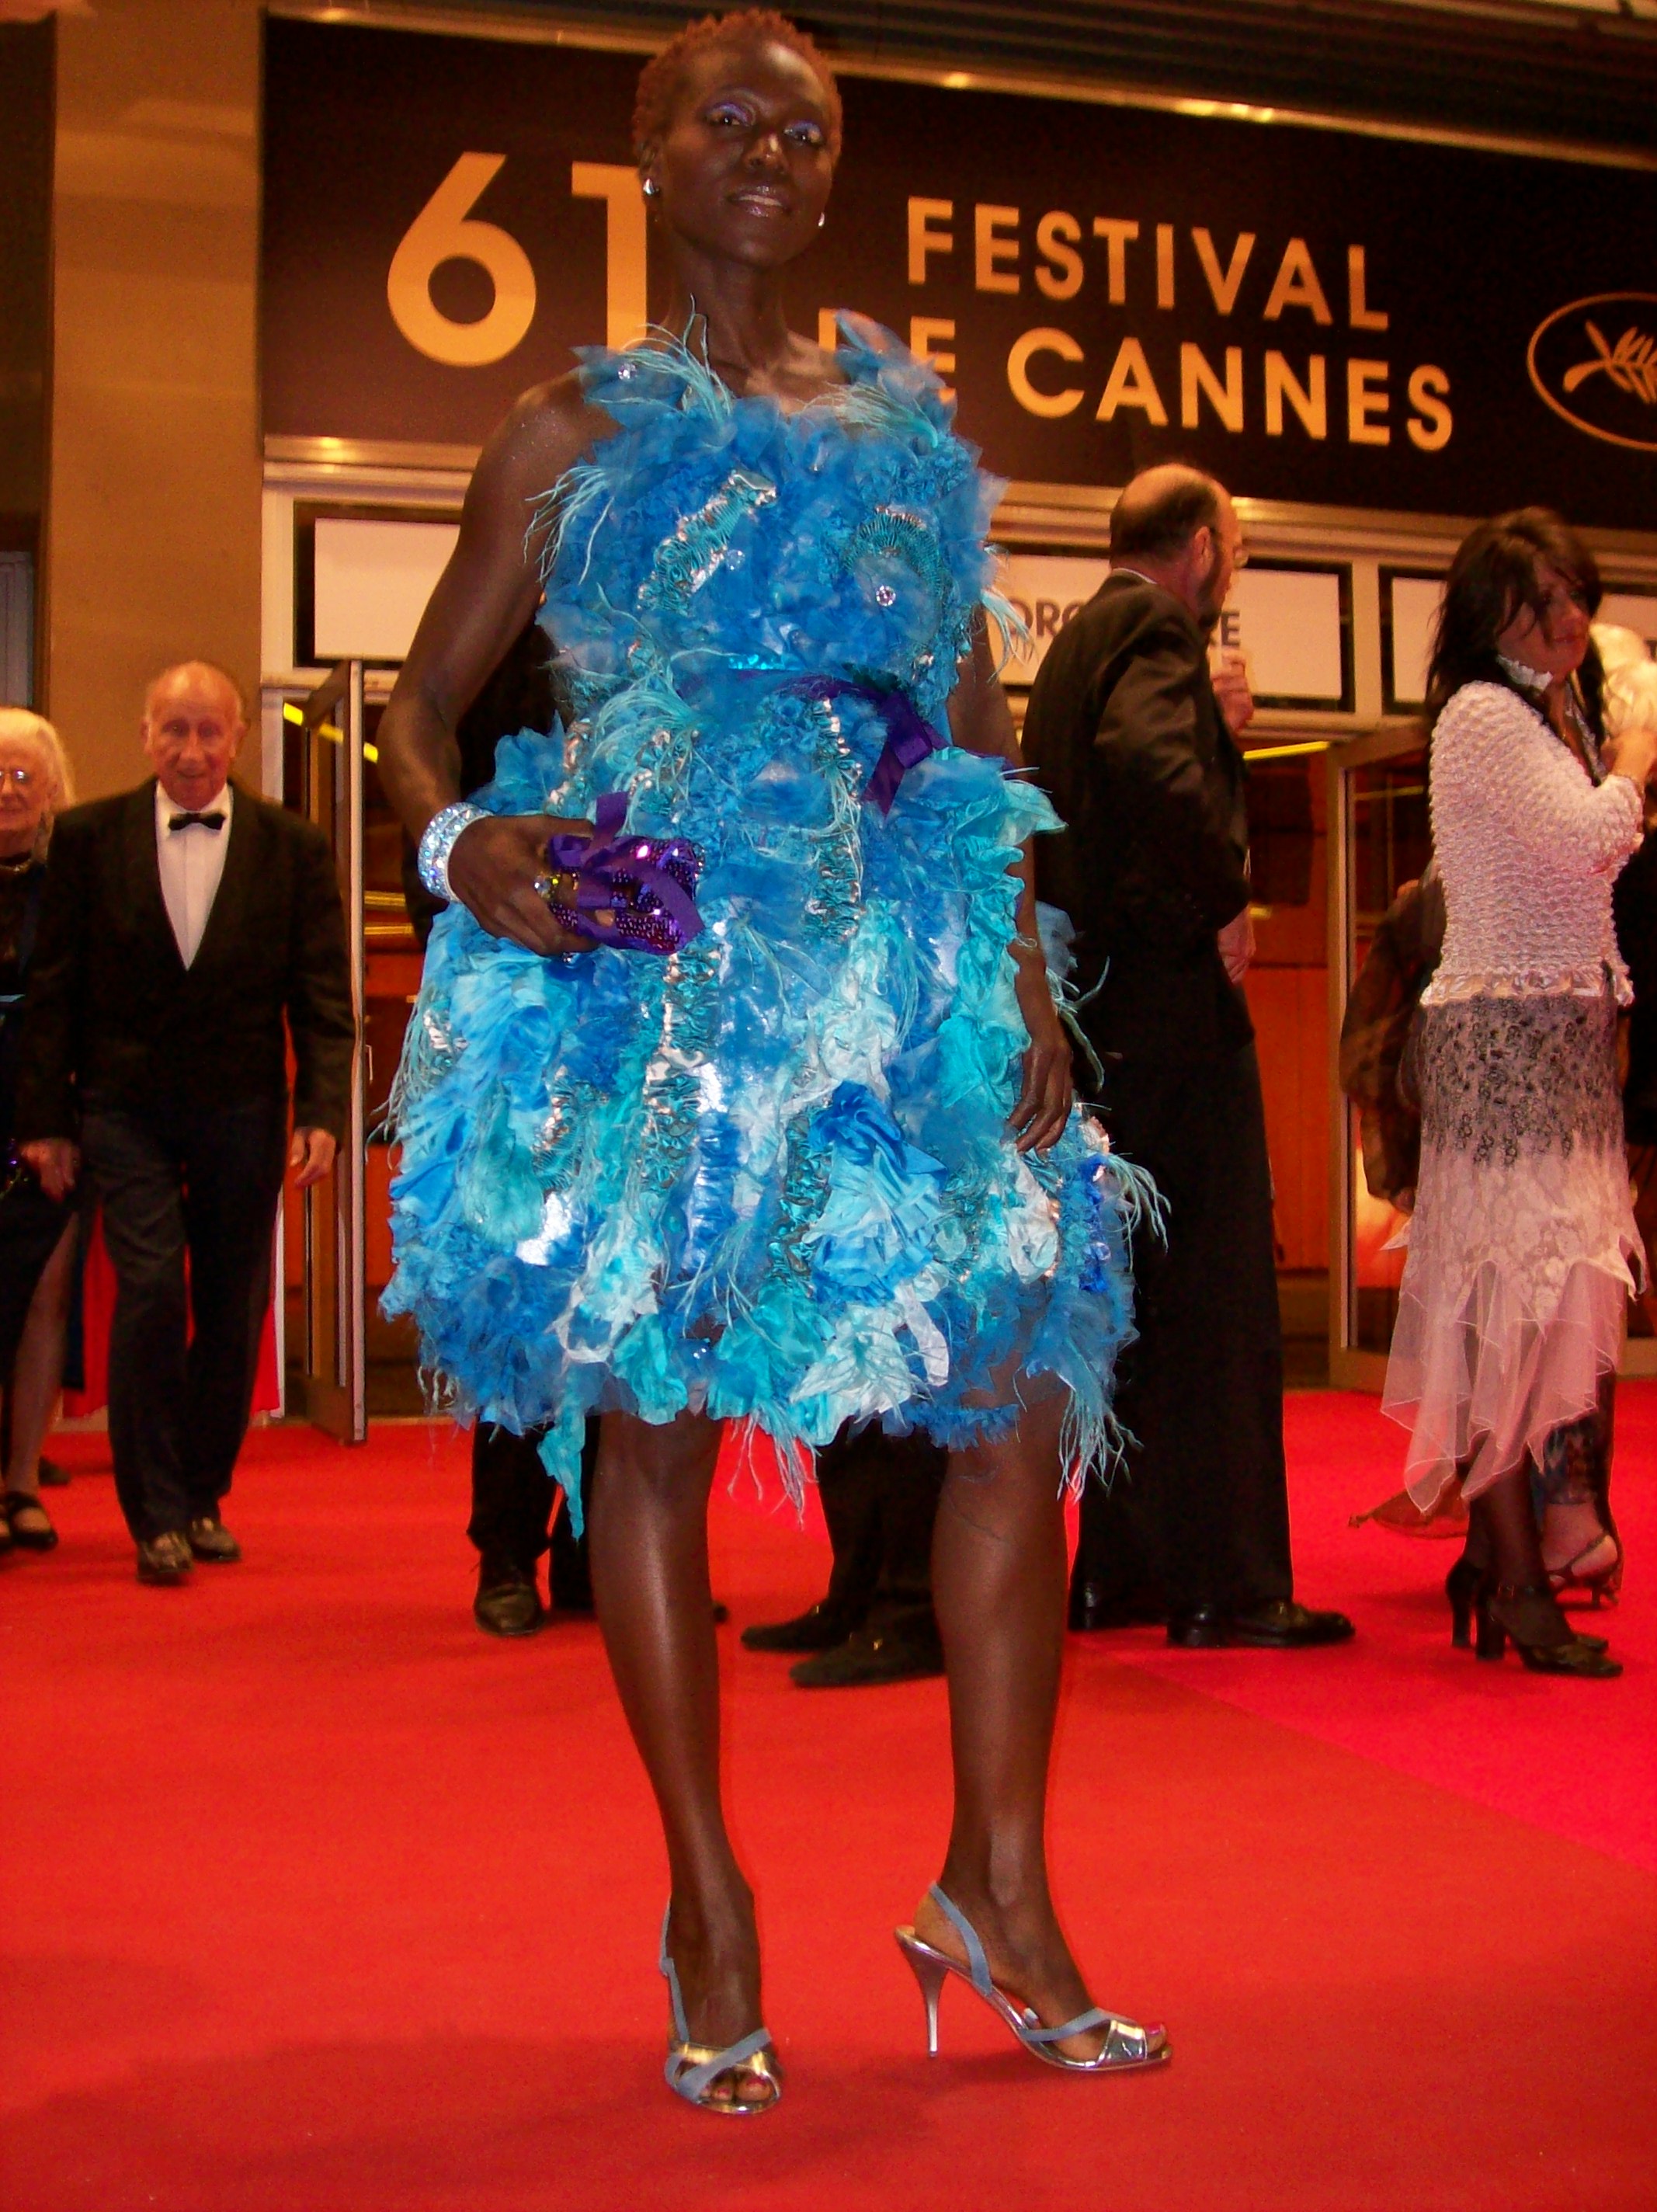 On the red carpet at Cannes